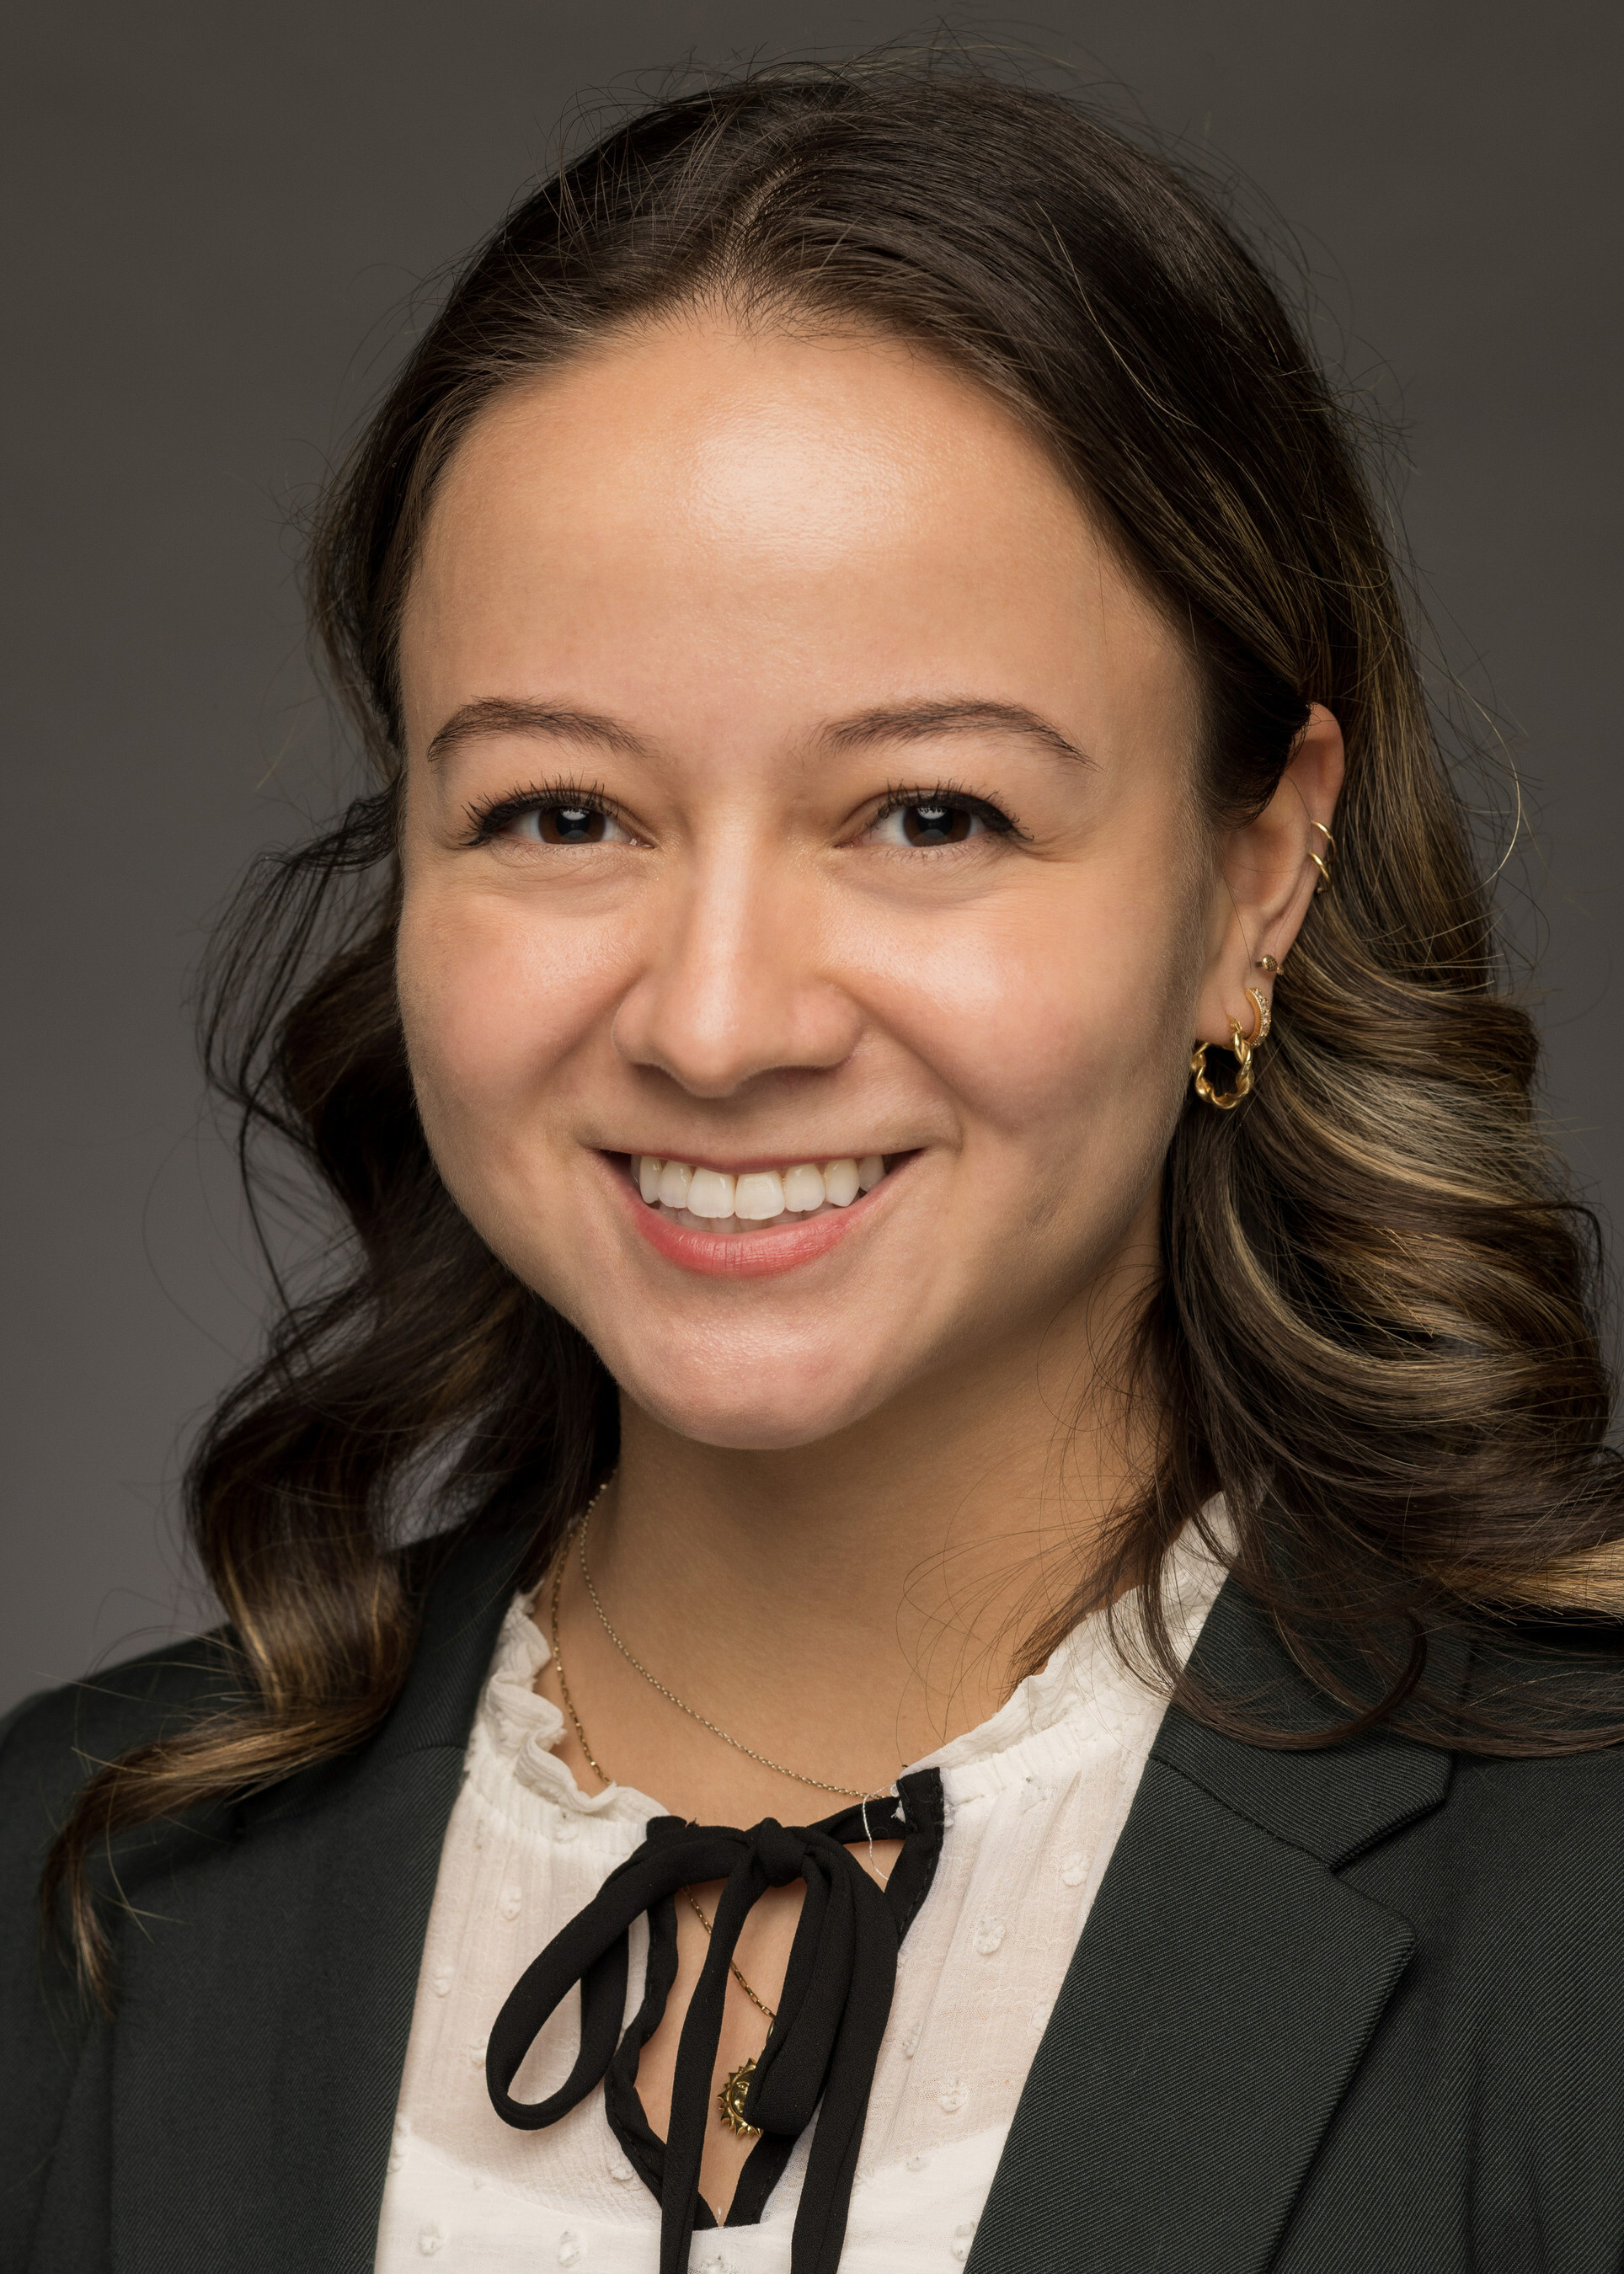 The Urology Care Foundation is pleased to announce Daniela Orozco Rendon from the Geisel School of Medicine at Dartmouth College as the first recipient of the Boston Scientific Medical Student Innovation Fellowship Award.